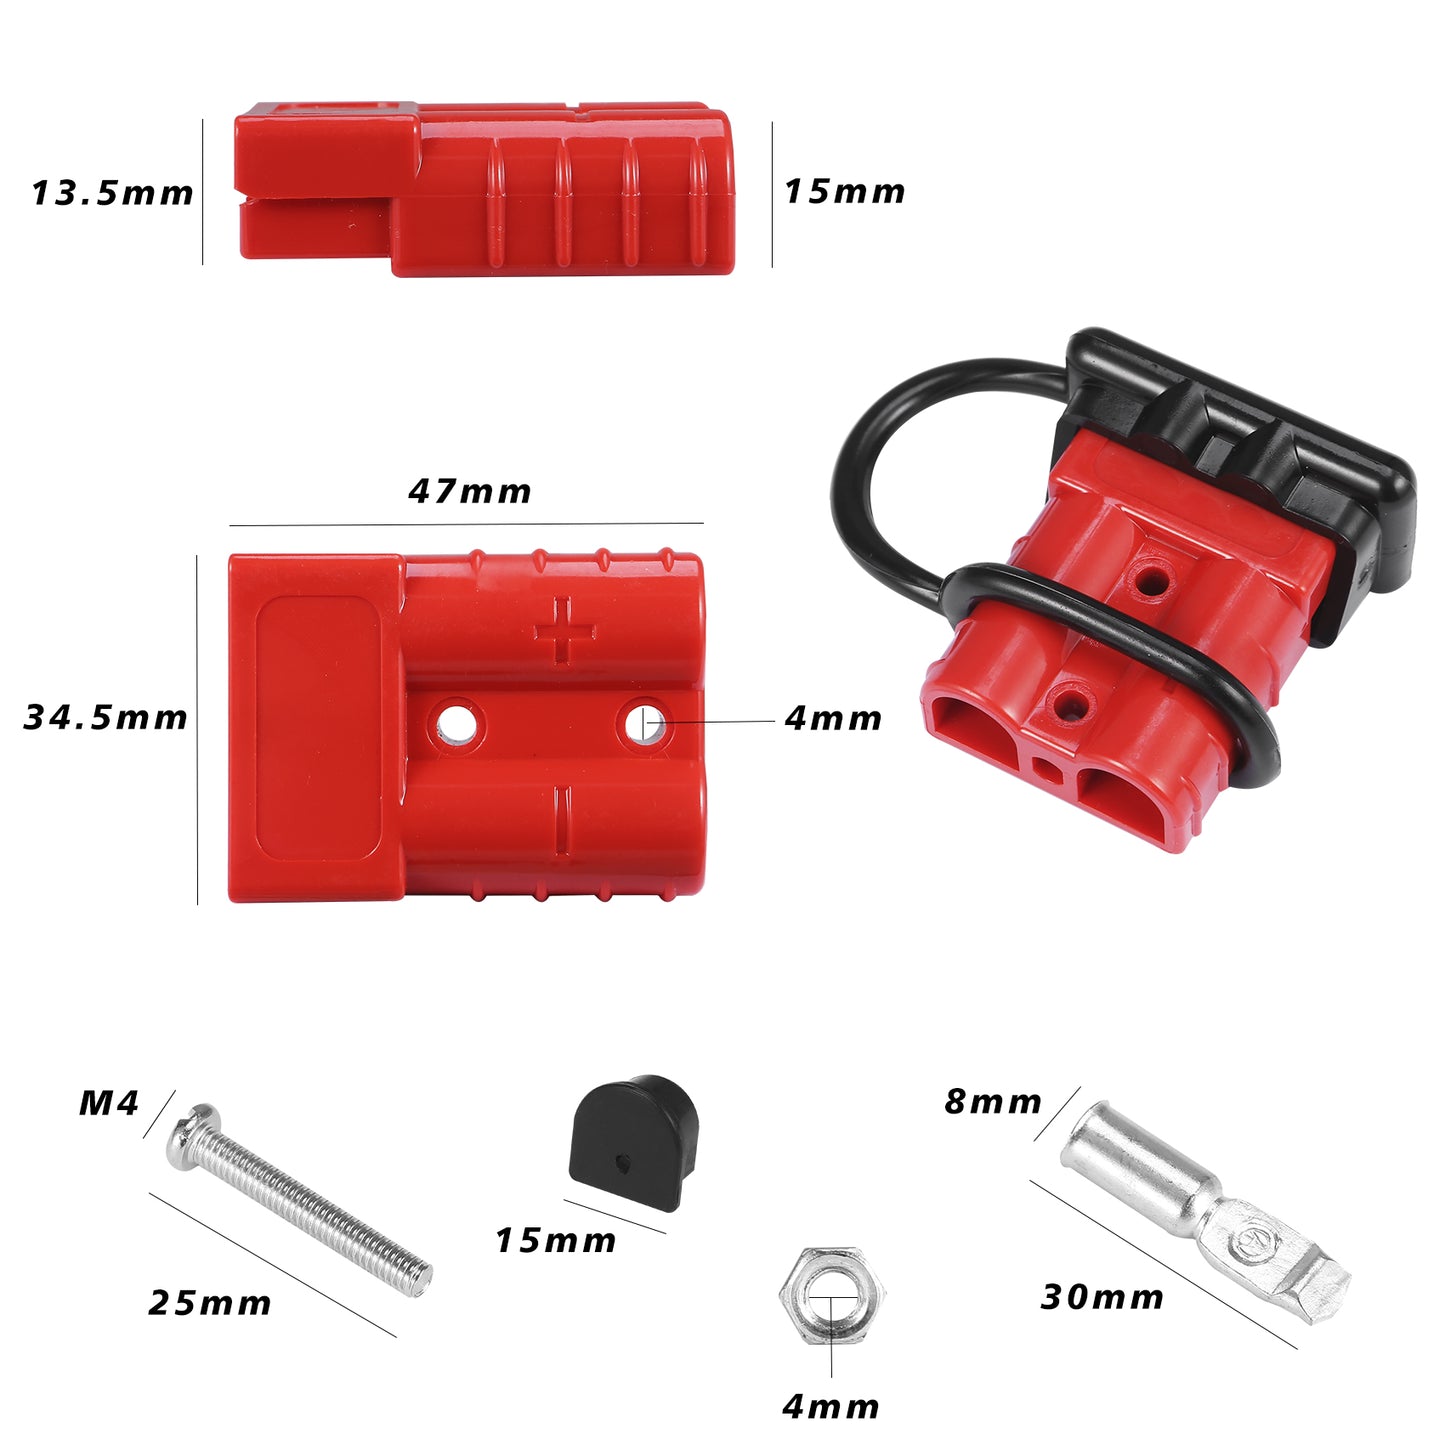 MUYI 2PCS 50Amp Battery Cable Quick Connect/Disconnect Plug Kit, 6-10 Gauge Wire Harness Connector for Recovery Winch Auto Car Trailer Marine Boat (Red)